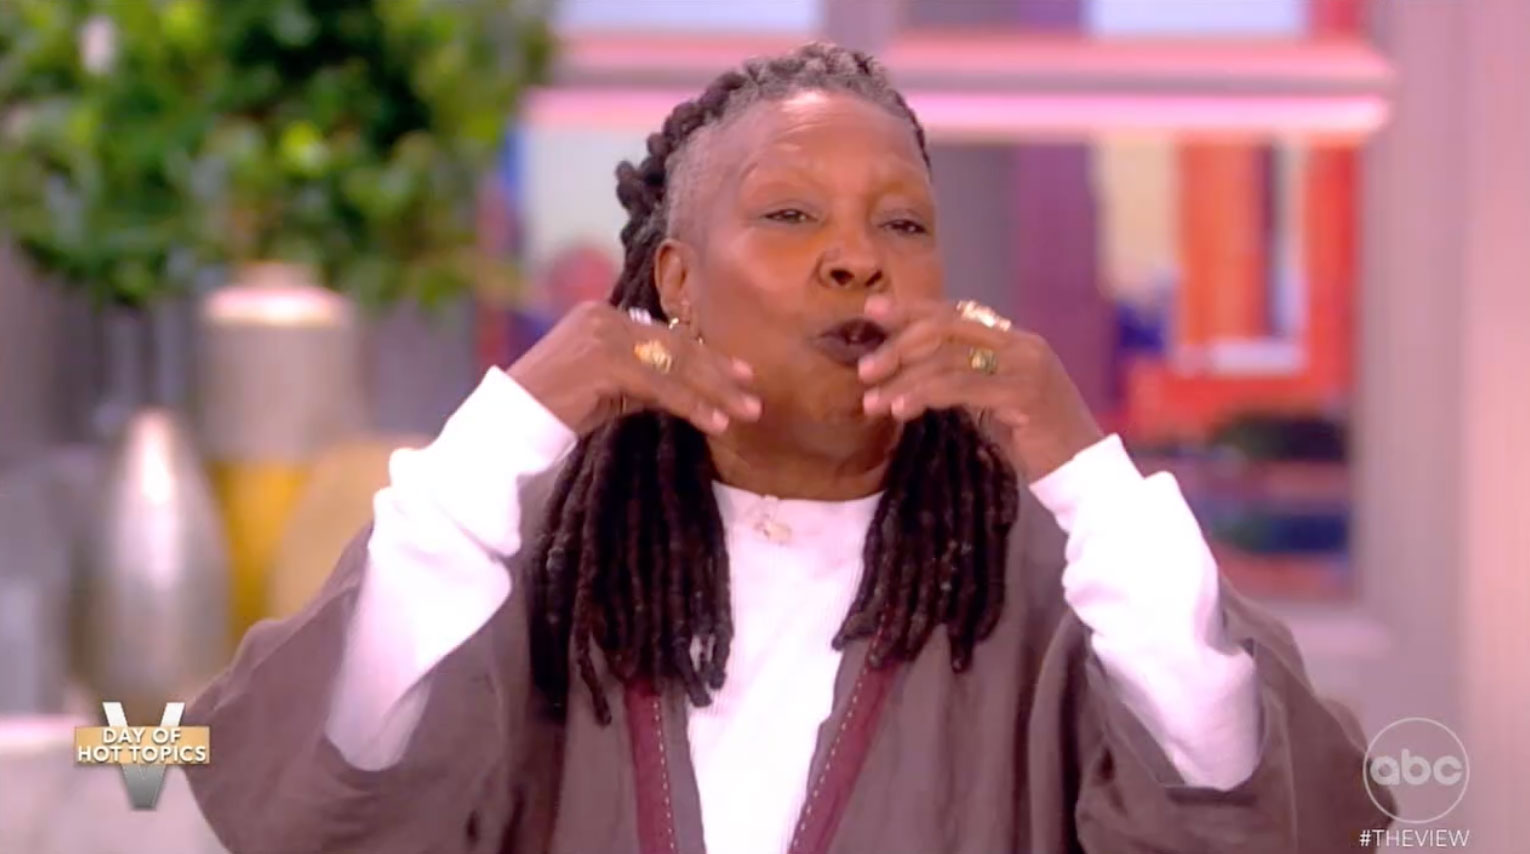 Whoopi informed those watching that 'she wasn't able to buy one' when she was younger either and that people who wanted homes had to 'work for one'